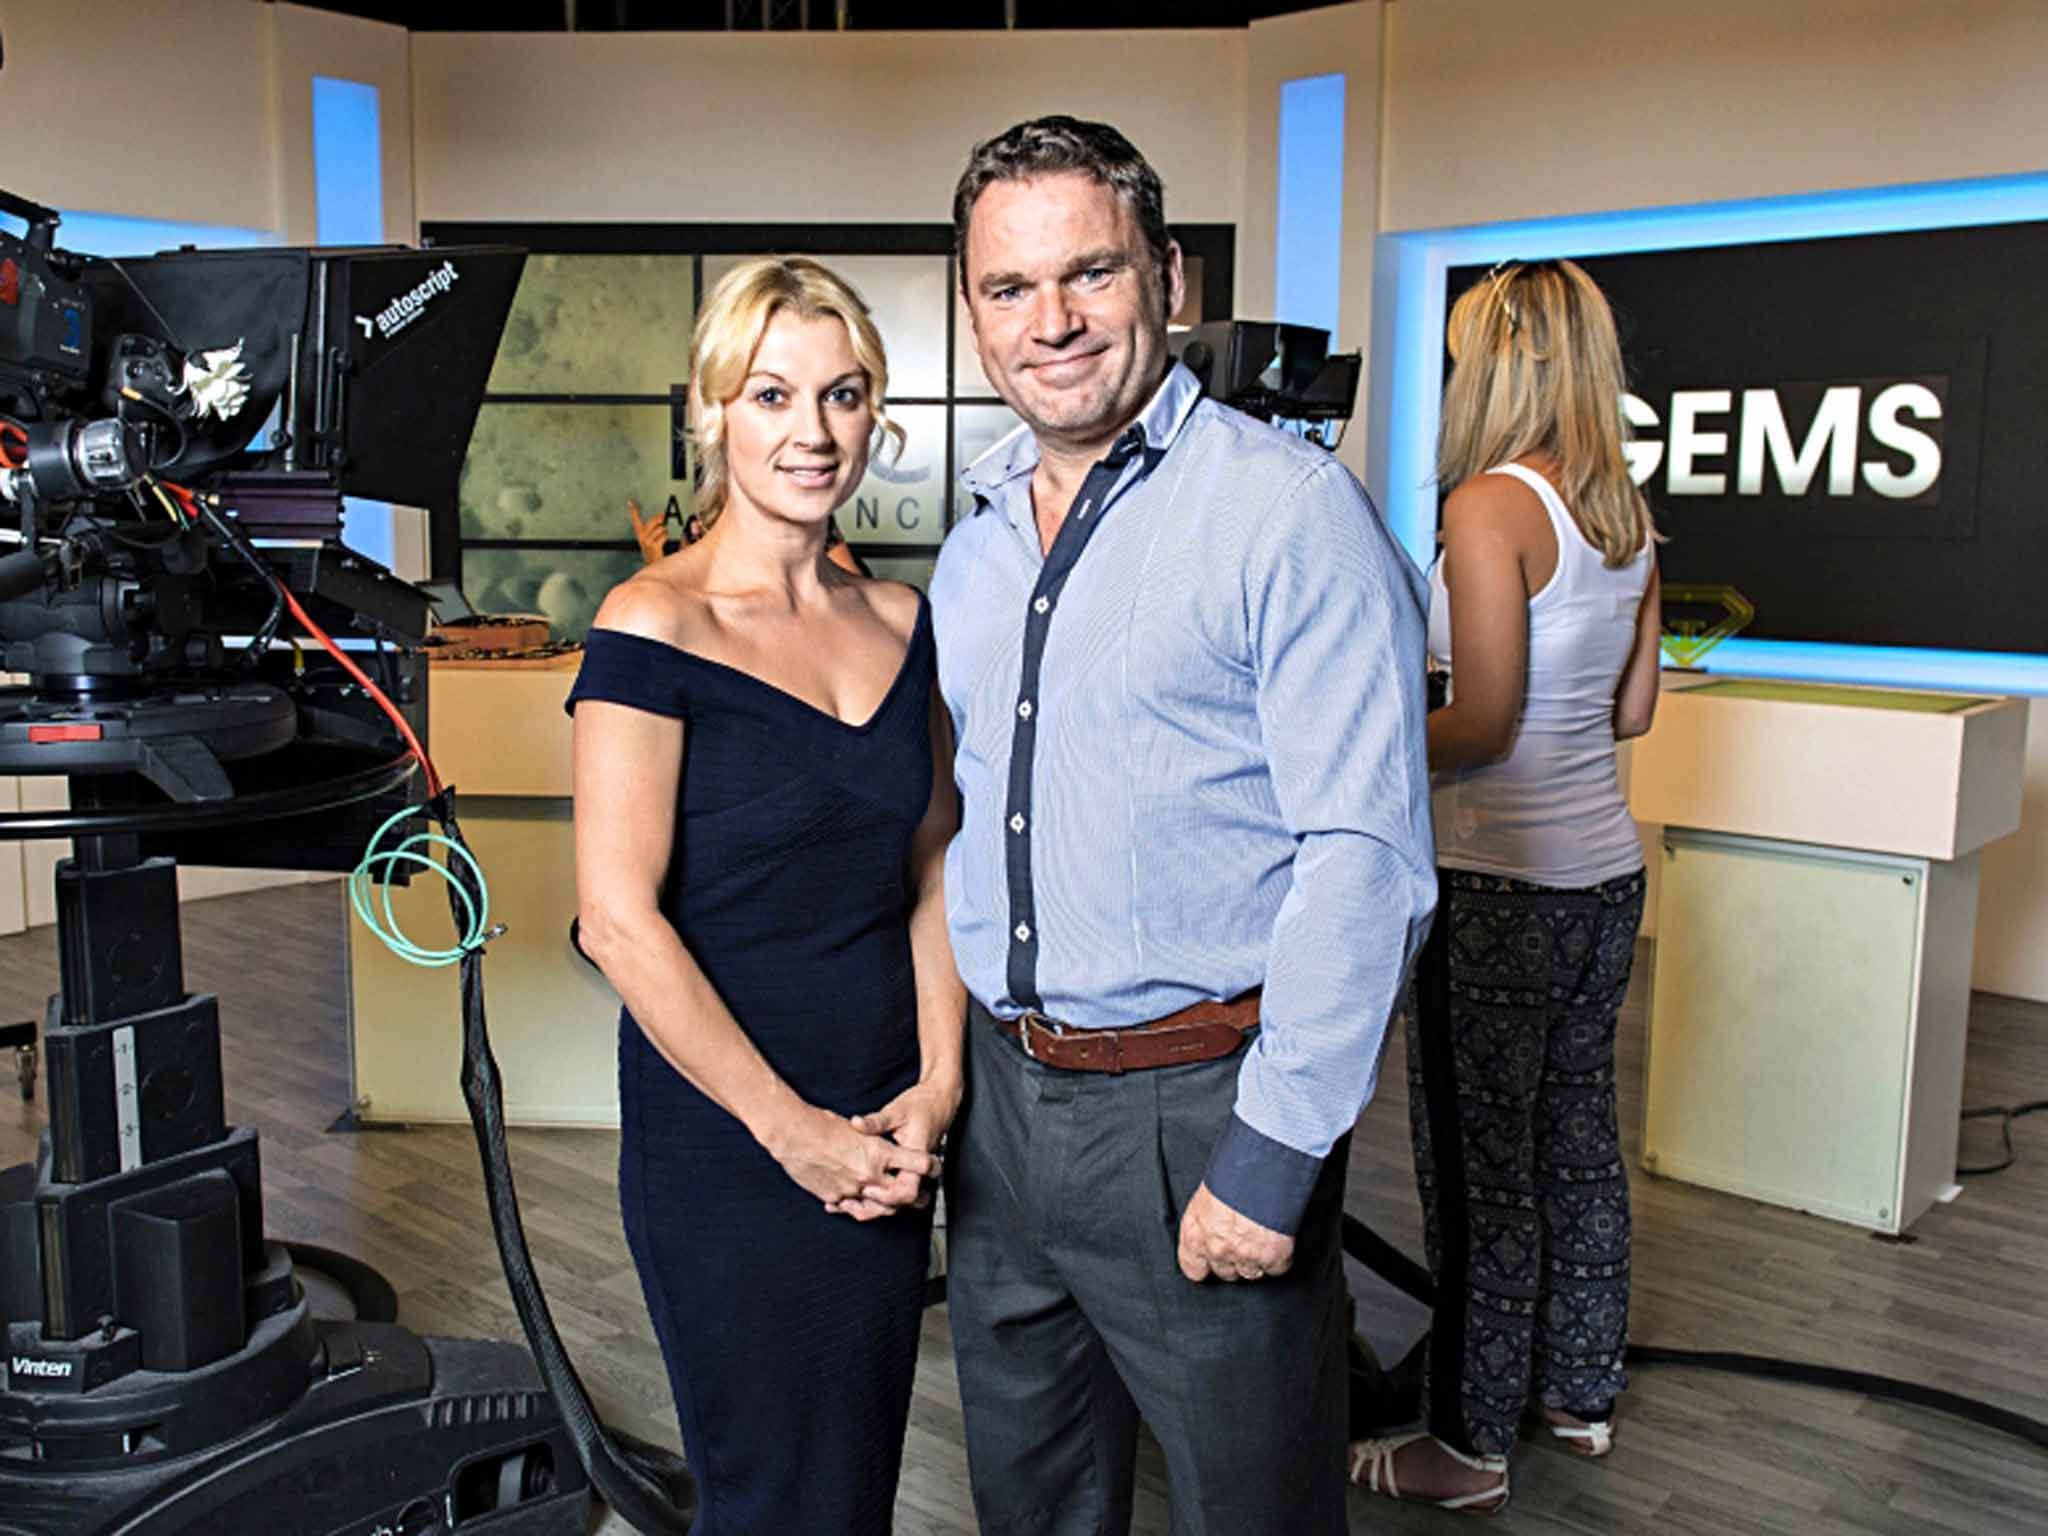 Precious moments: husband-and-wife team Sarah and Steve Bennett in 'Gems TV'